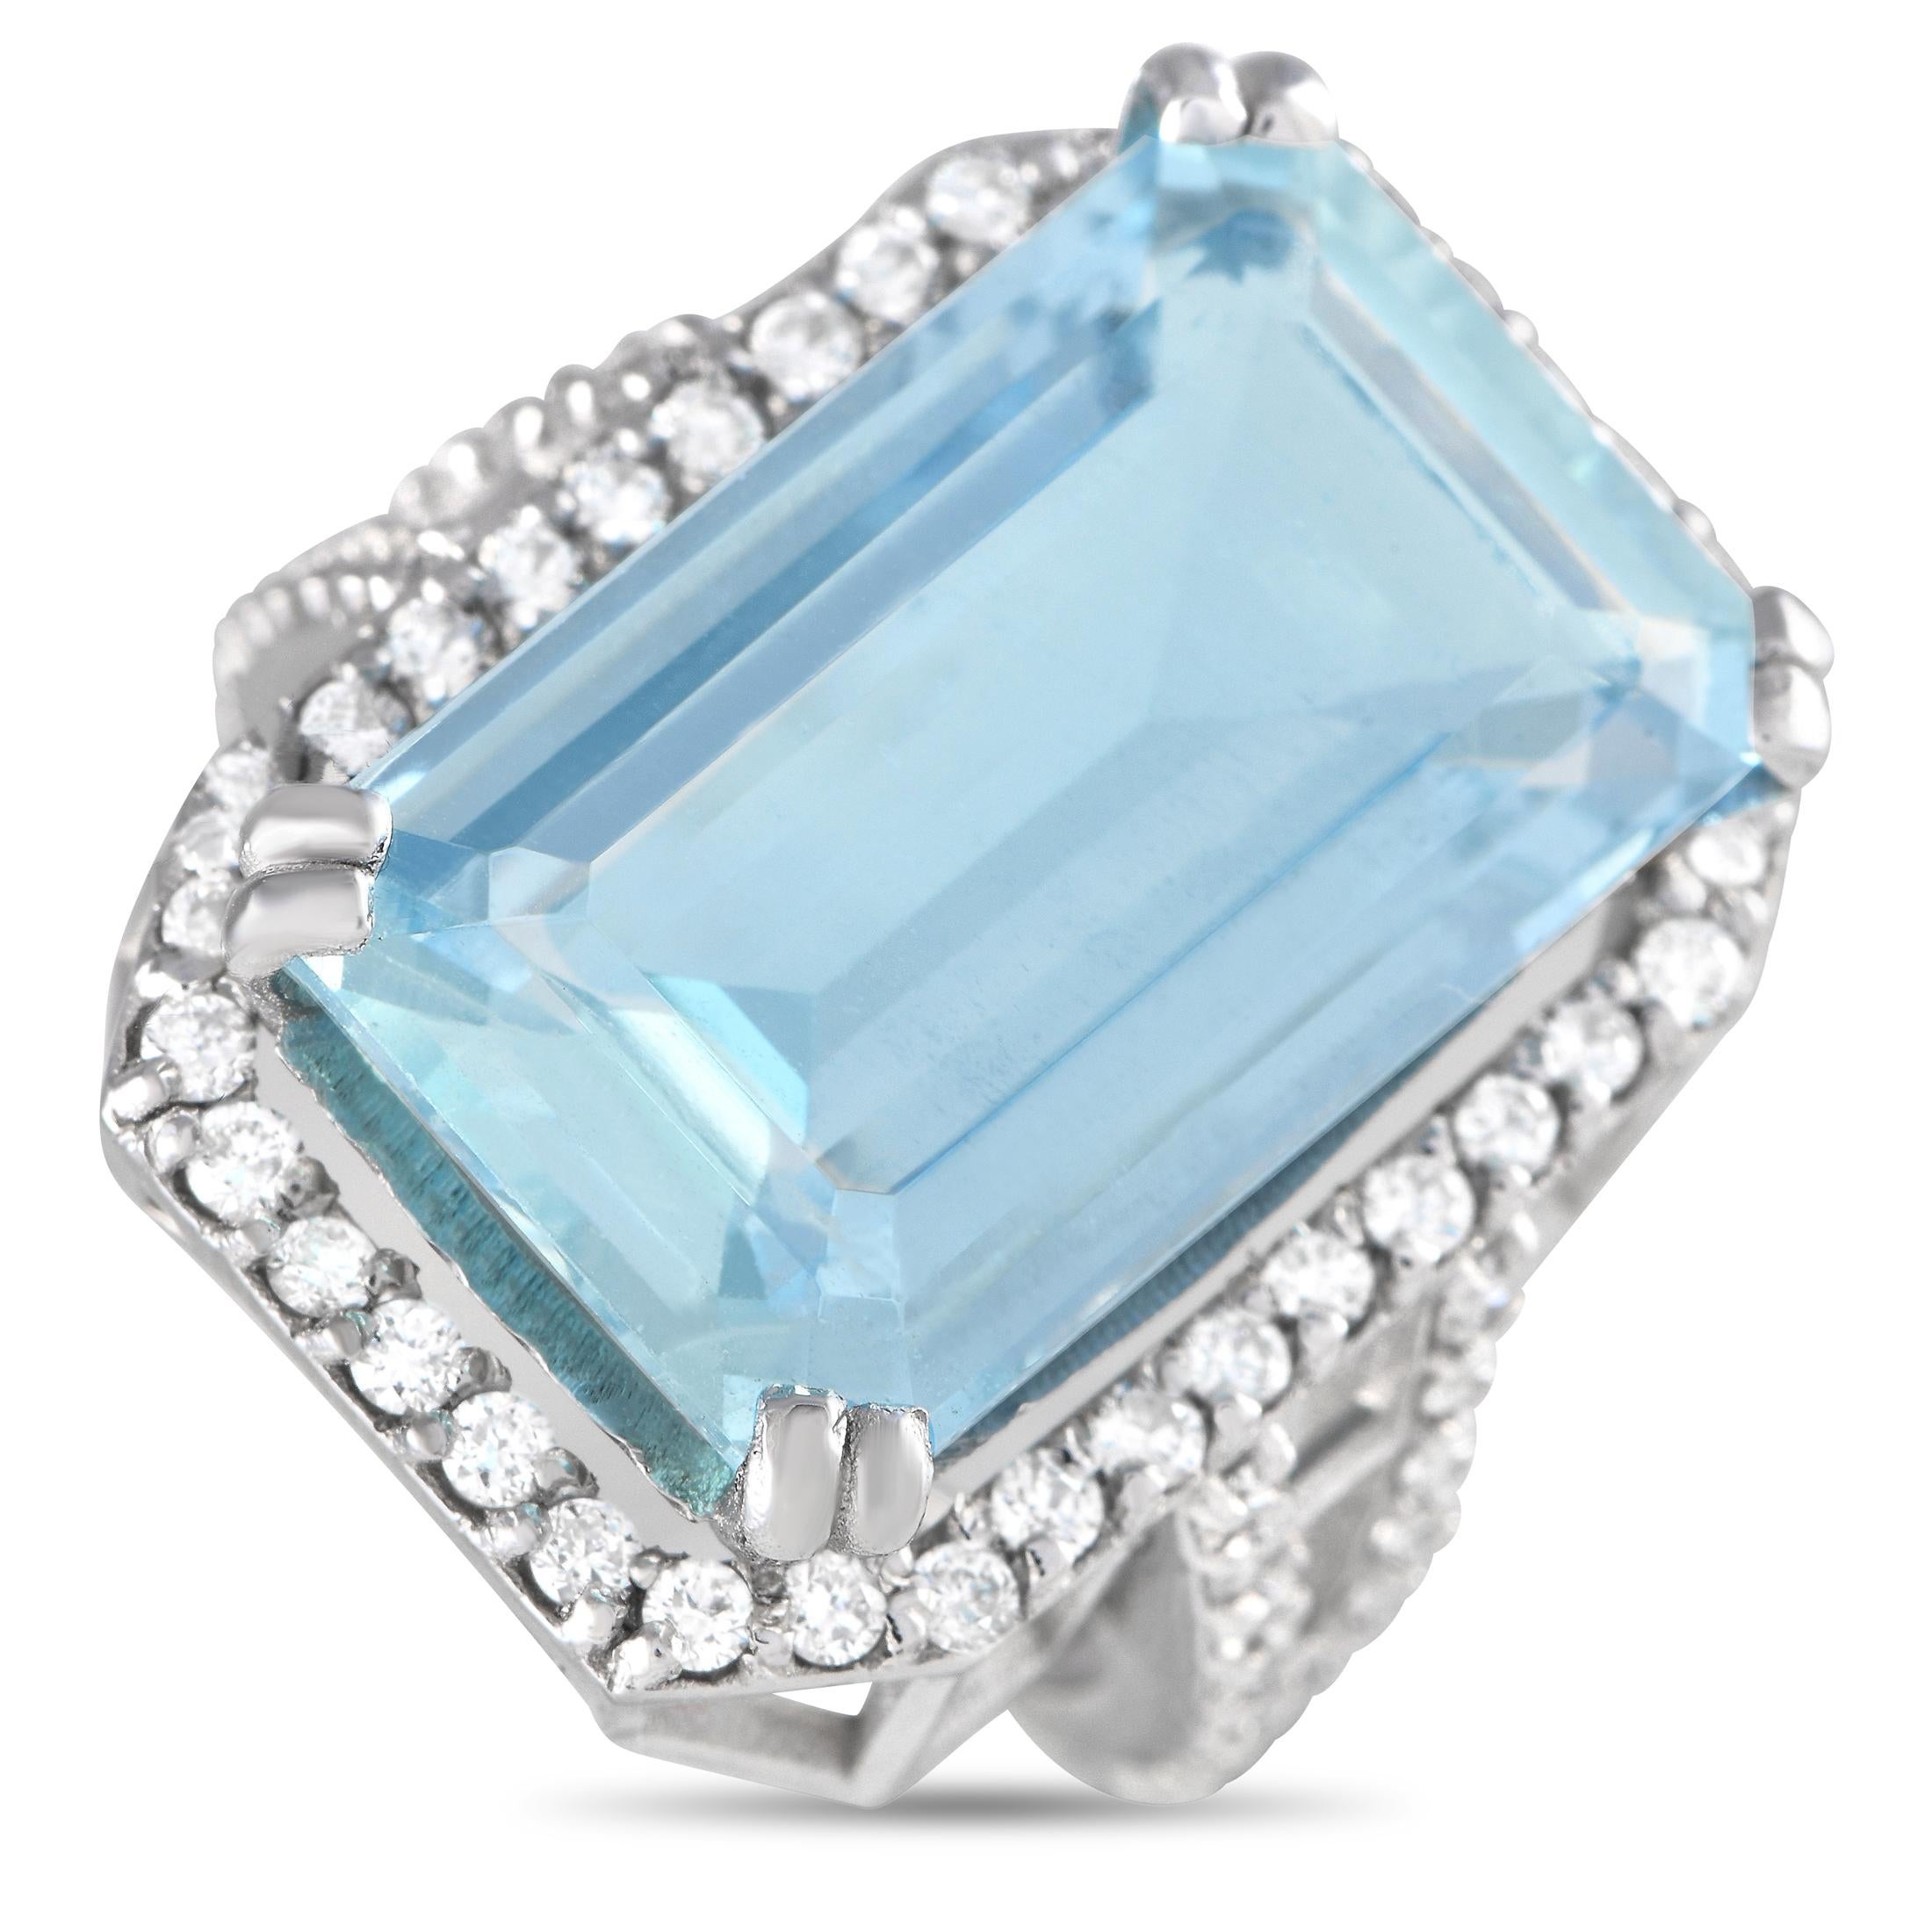 LB Exclusive Platinum 1.25ct Diamond and Aquamarine Ring In Excellent Condition For Sale In Southampton, PA